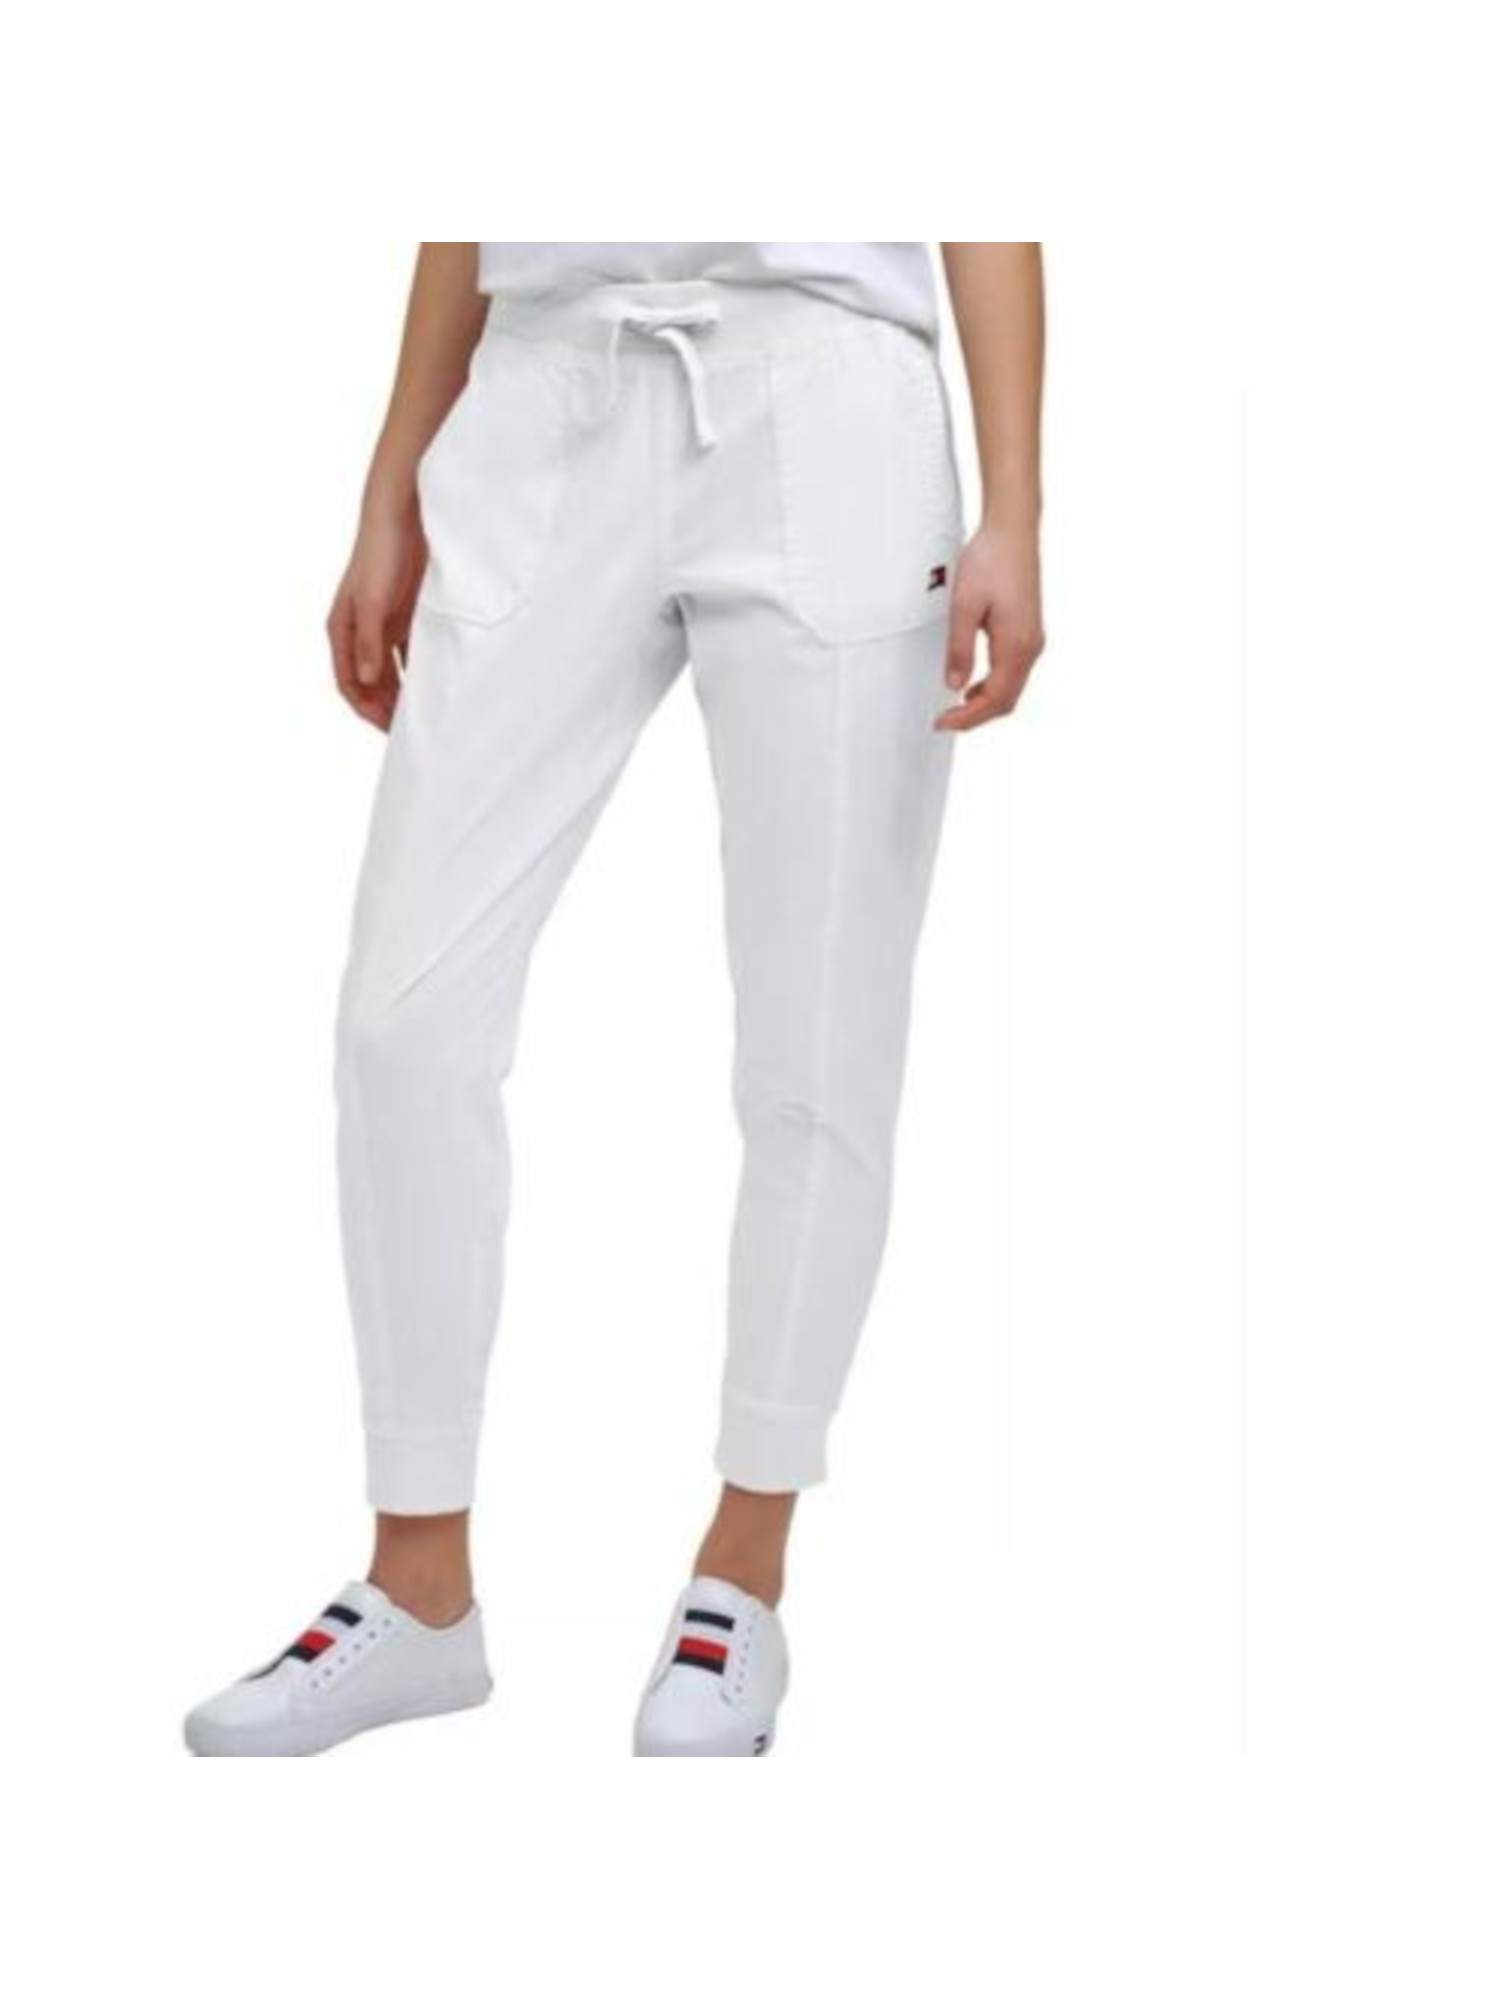 TOMMY HILFIGER Womens White Stretch Pocketed Ribbed Pull-on Drawstring Jogger Active Wear Cargo Pants XL